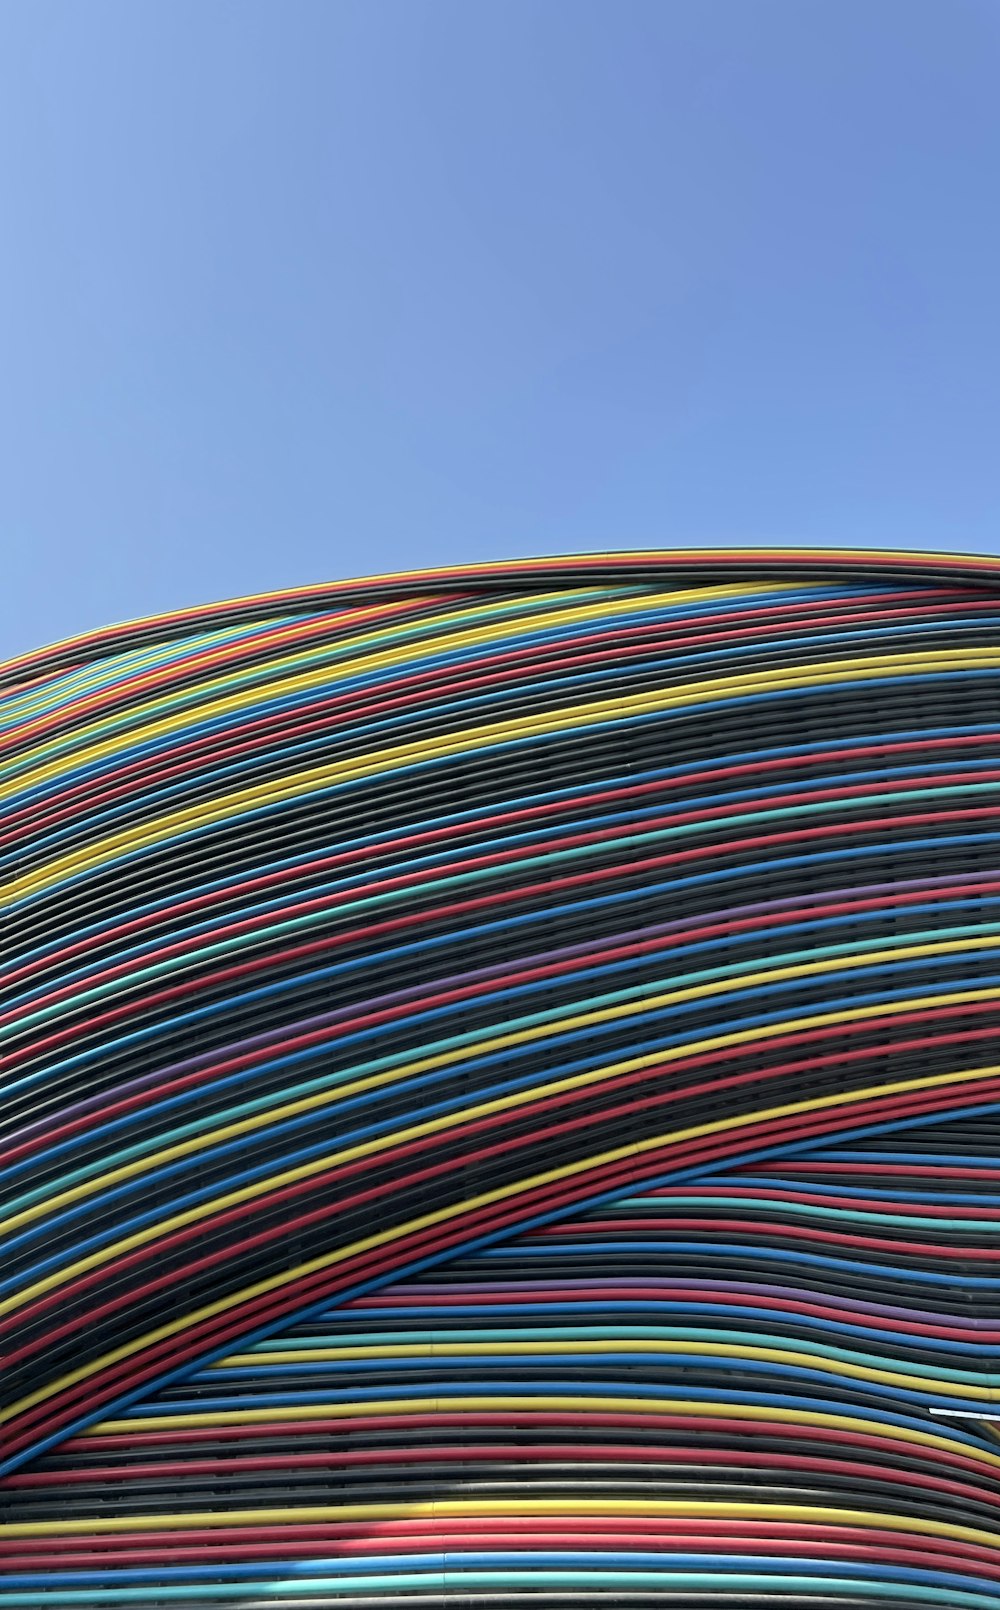 a large stack of multicolored wires against a blue sky